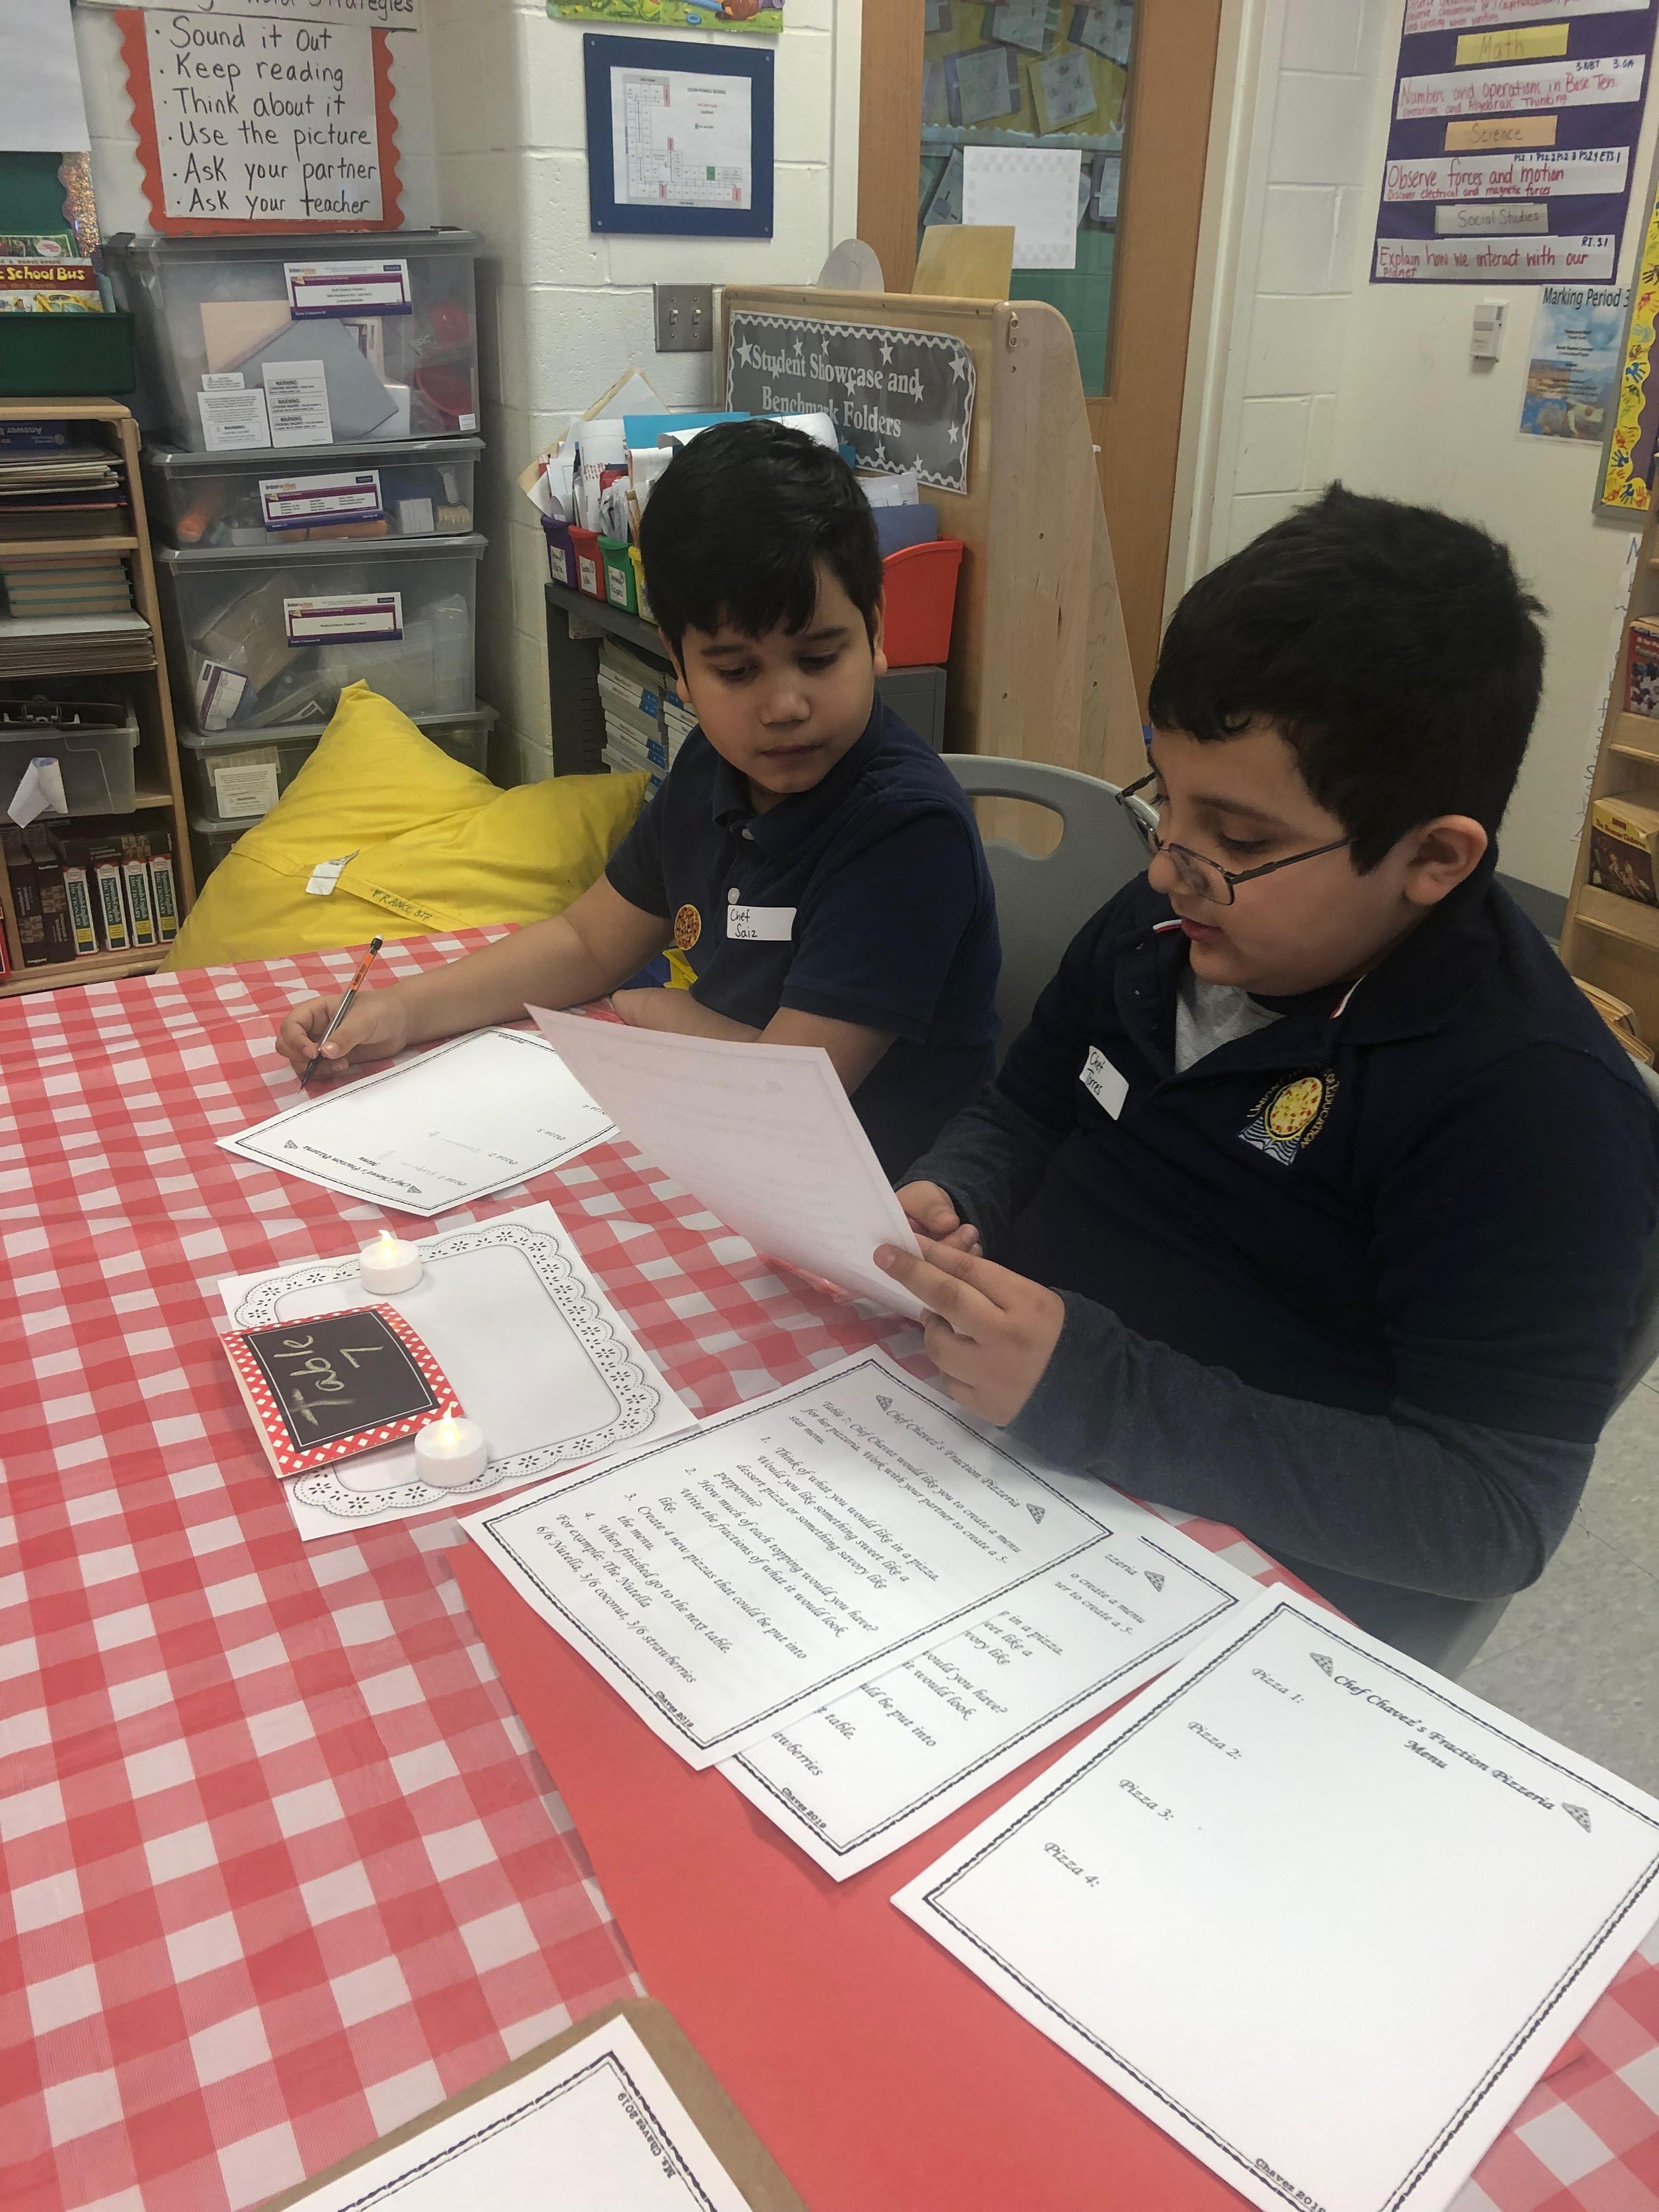 two boys working on fractions together